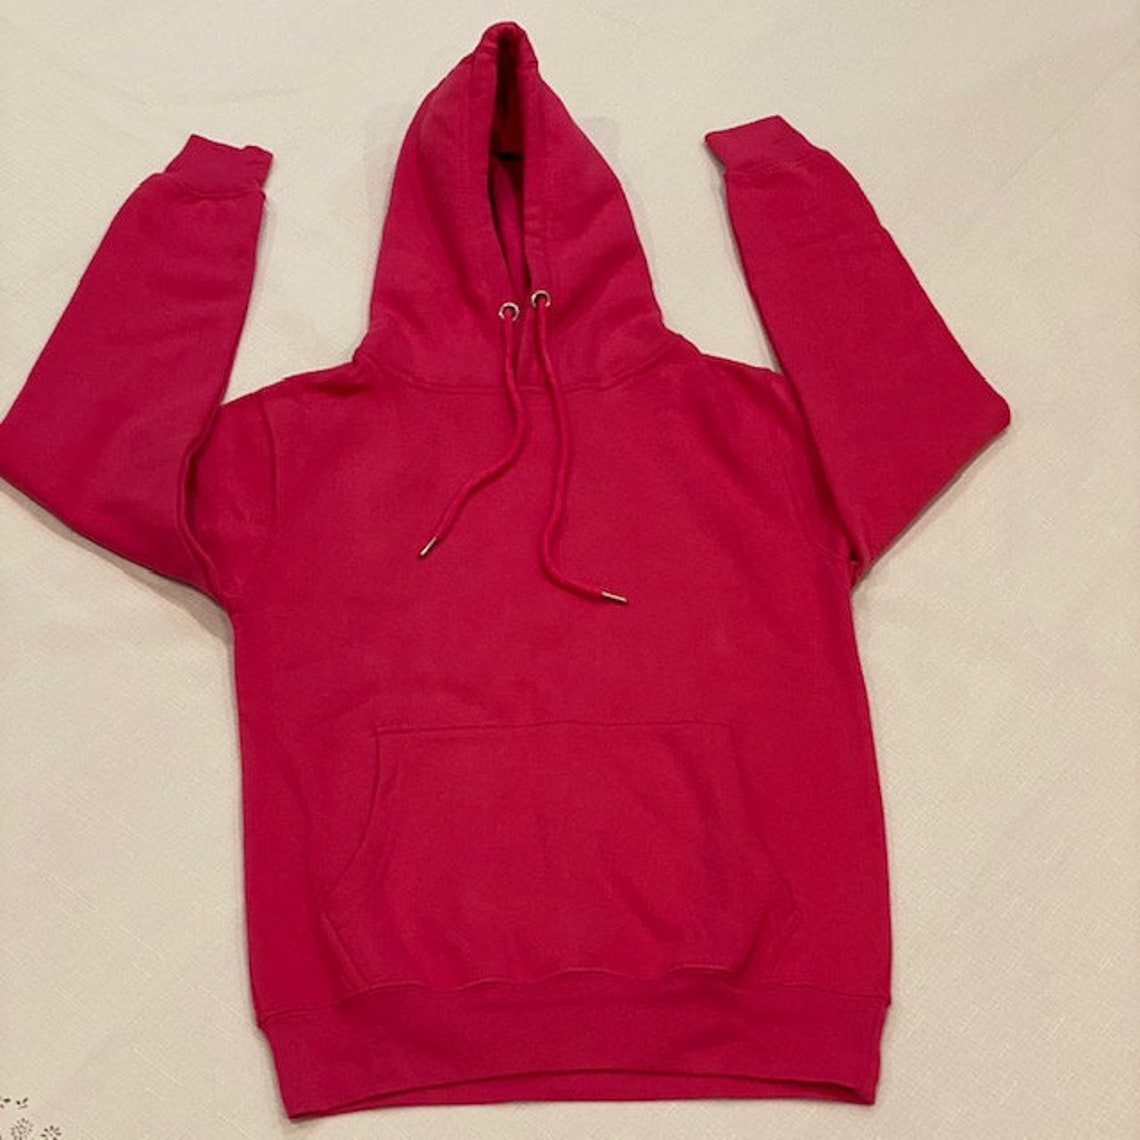 Best Quality Blank Hoodies 19 Colors Designer Cut Fitted | Etsy